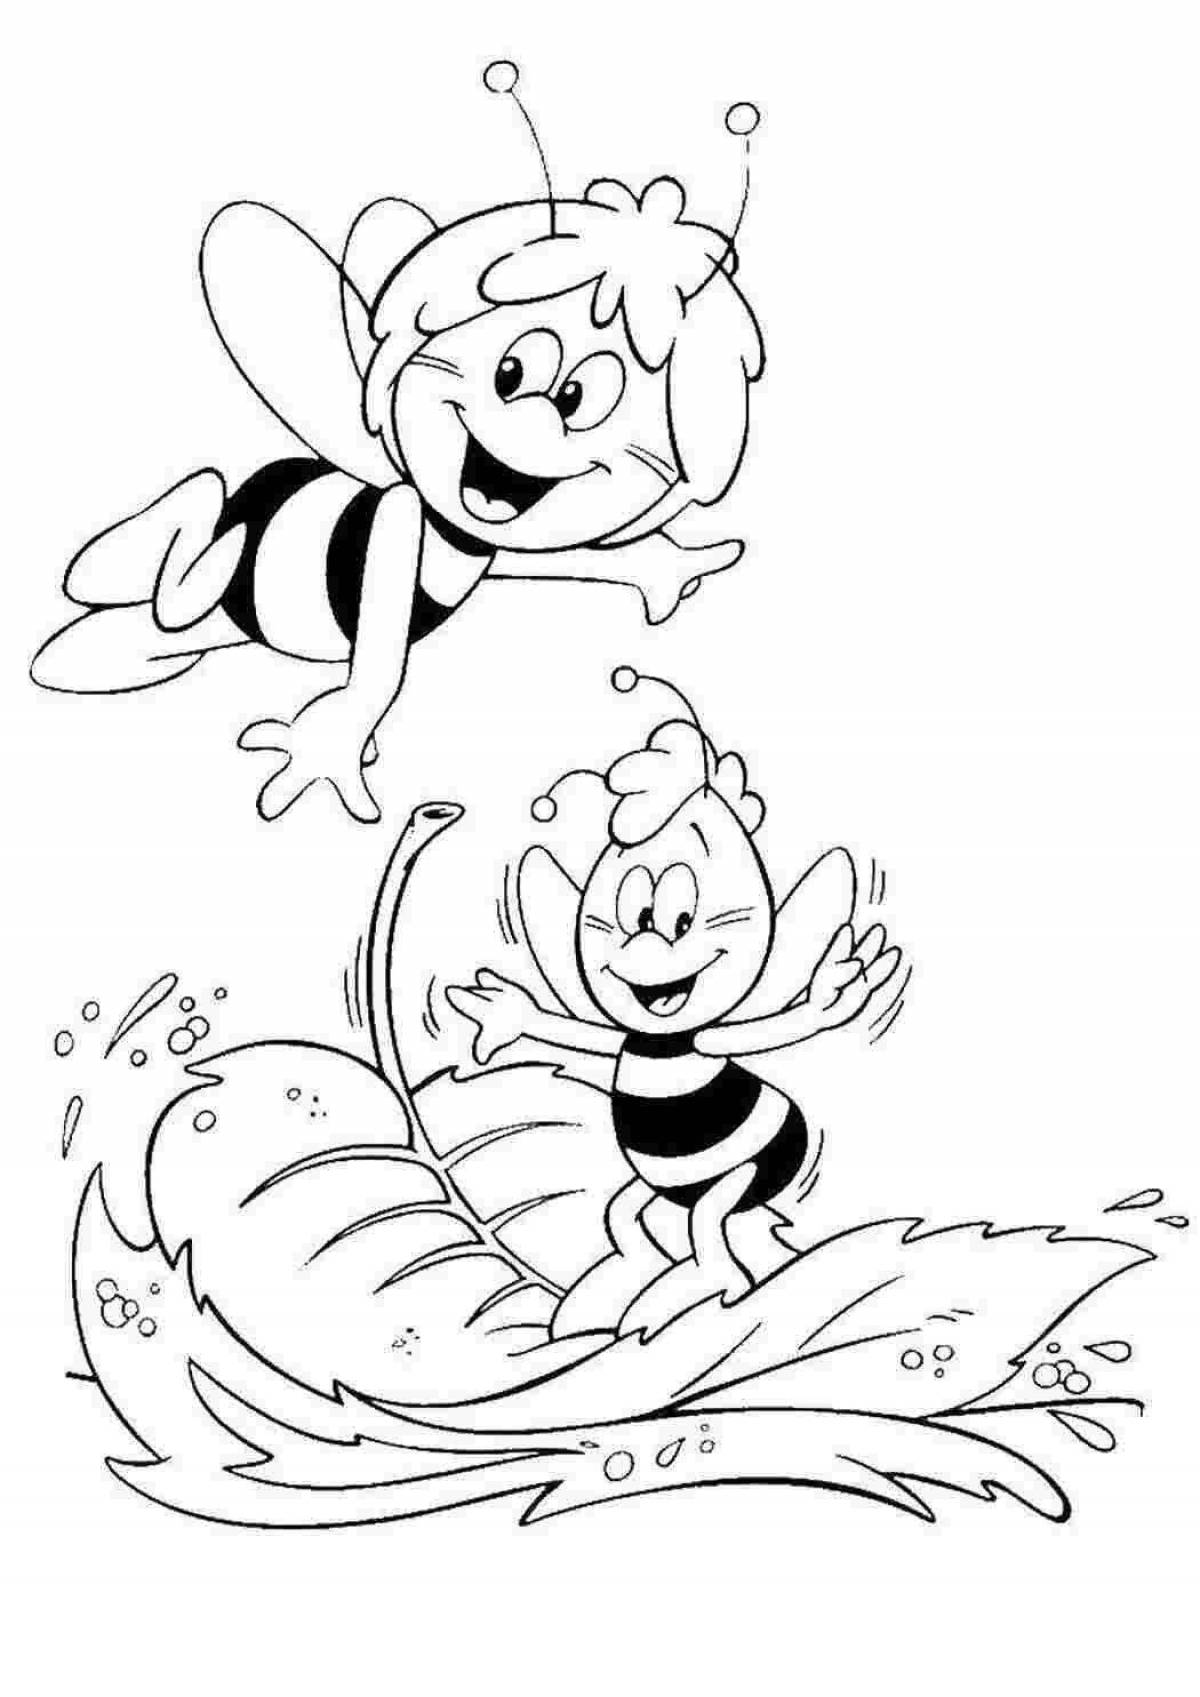 Exciting bee coloring book for 6-7 year olds